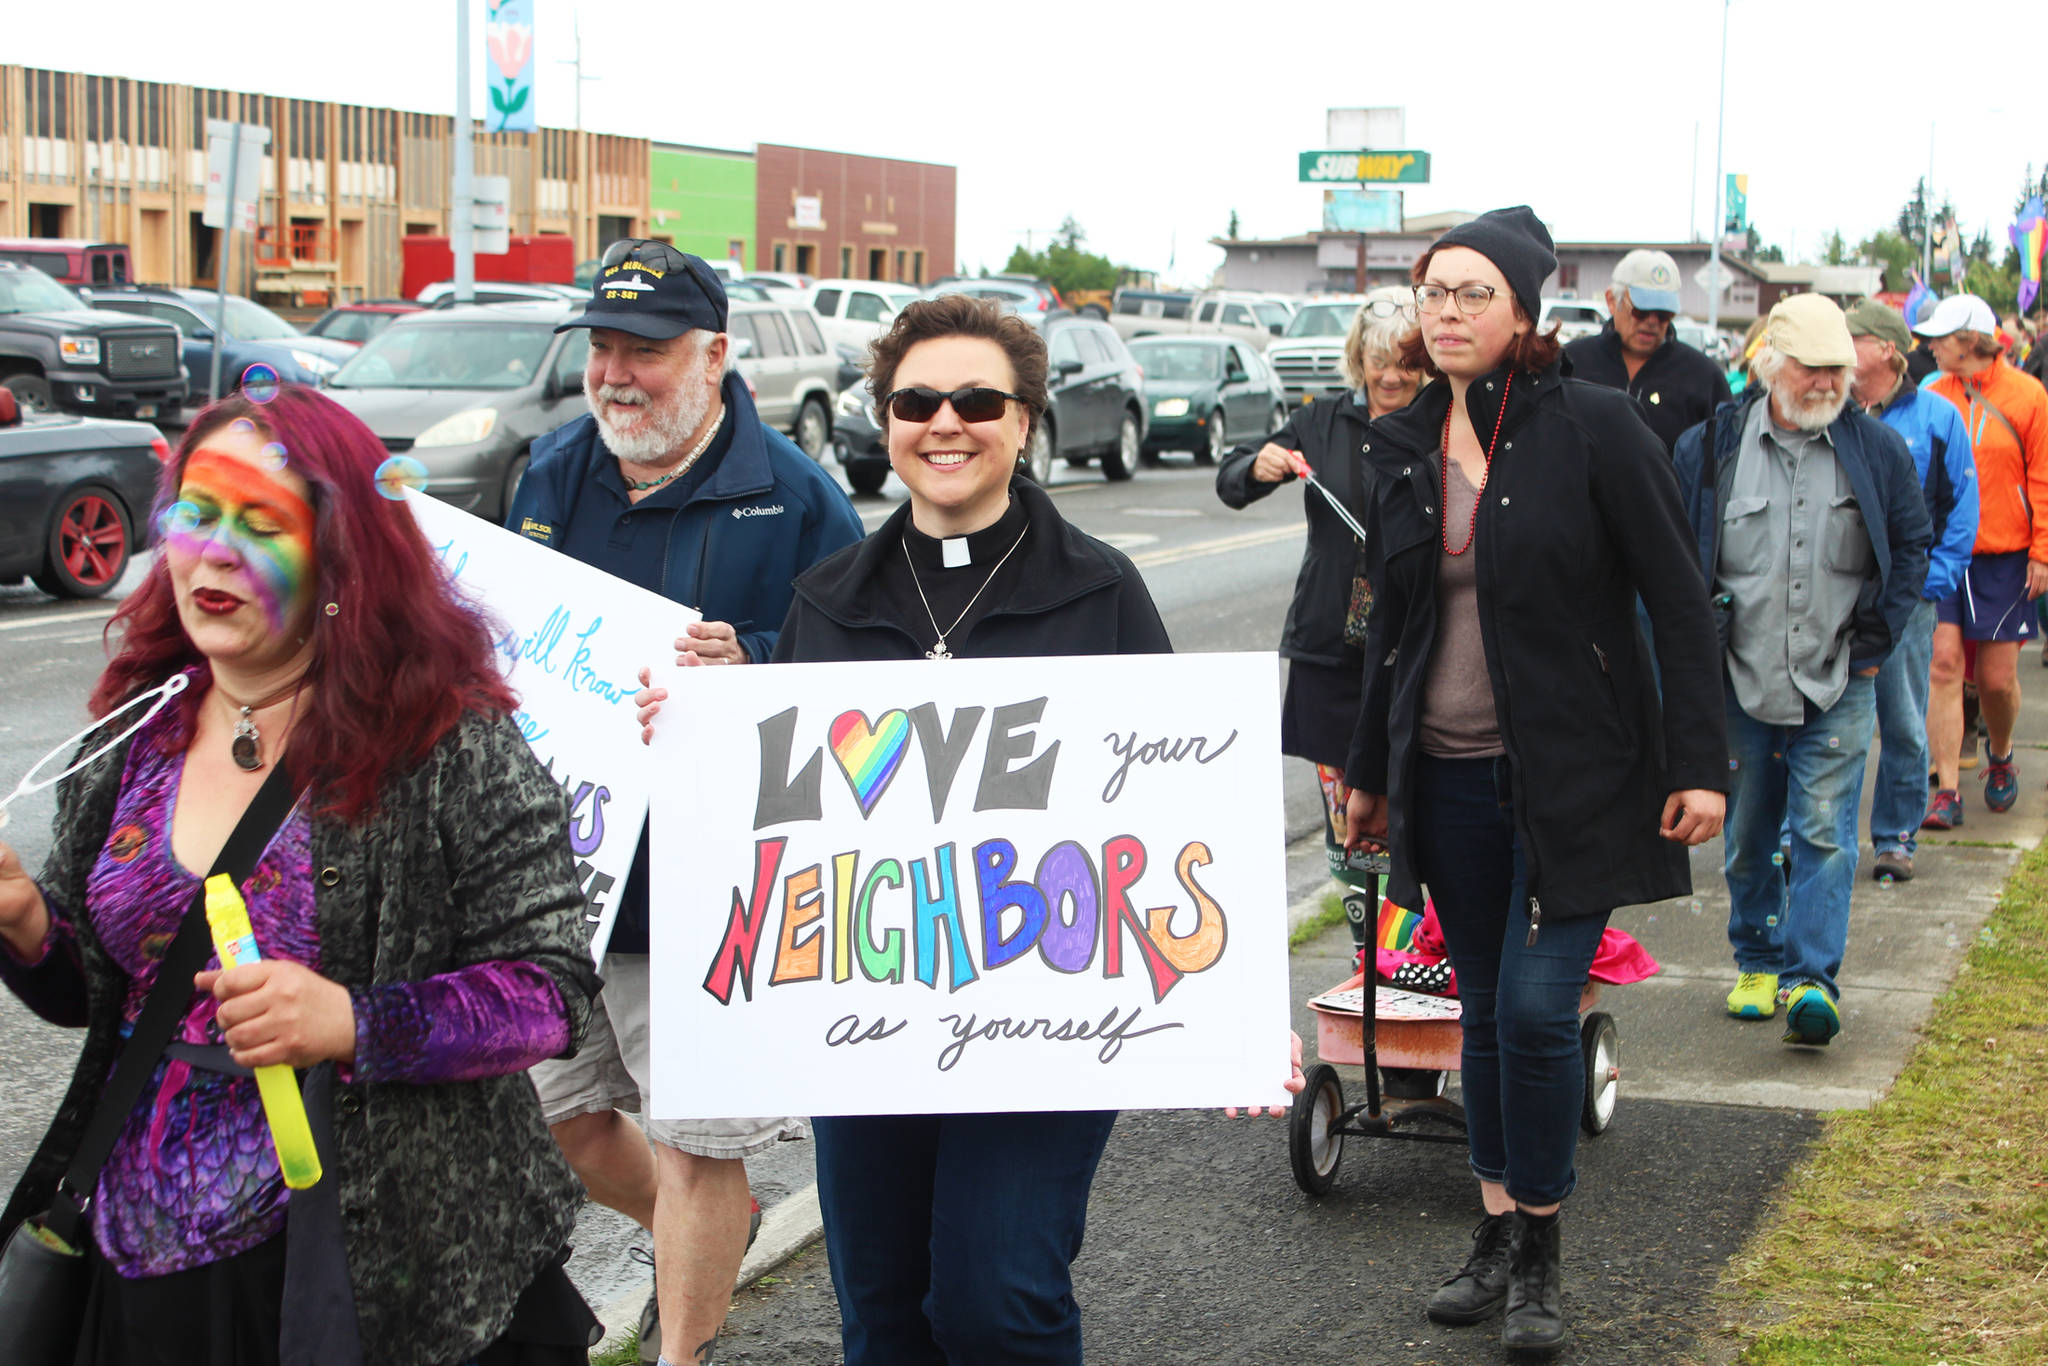 Lisa Talbot, a pastor at Homer United Methodist Church, walks along Pioneer Avenue during Homer’s first Pride March with a sign that reads “Love your neighbors as yourself” on Saturday, June 23, 2018 in Homer, Alaska. (Photo by Megan Pacer/Homer News)